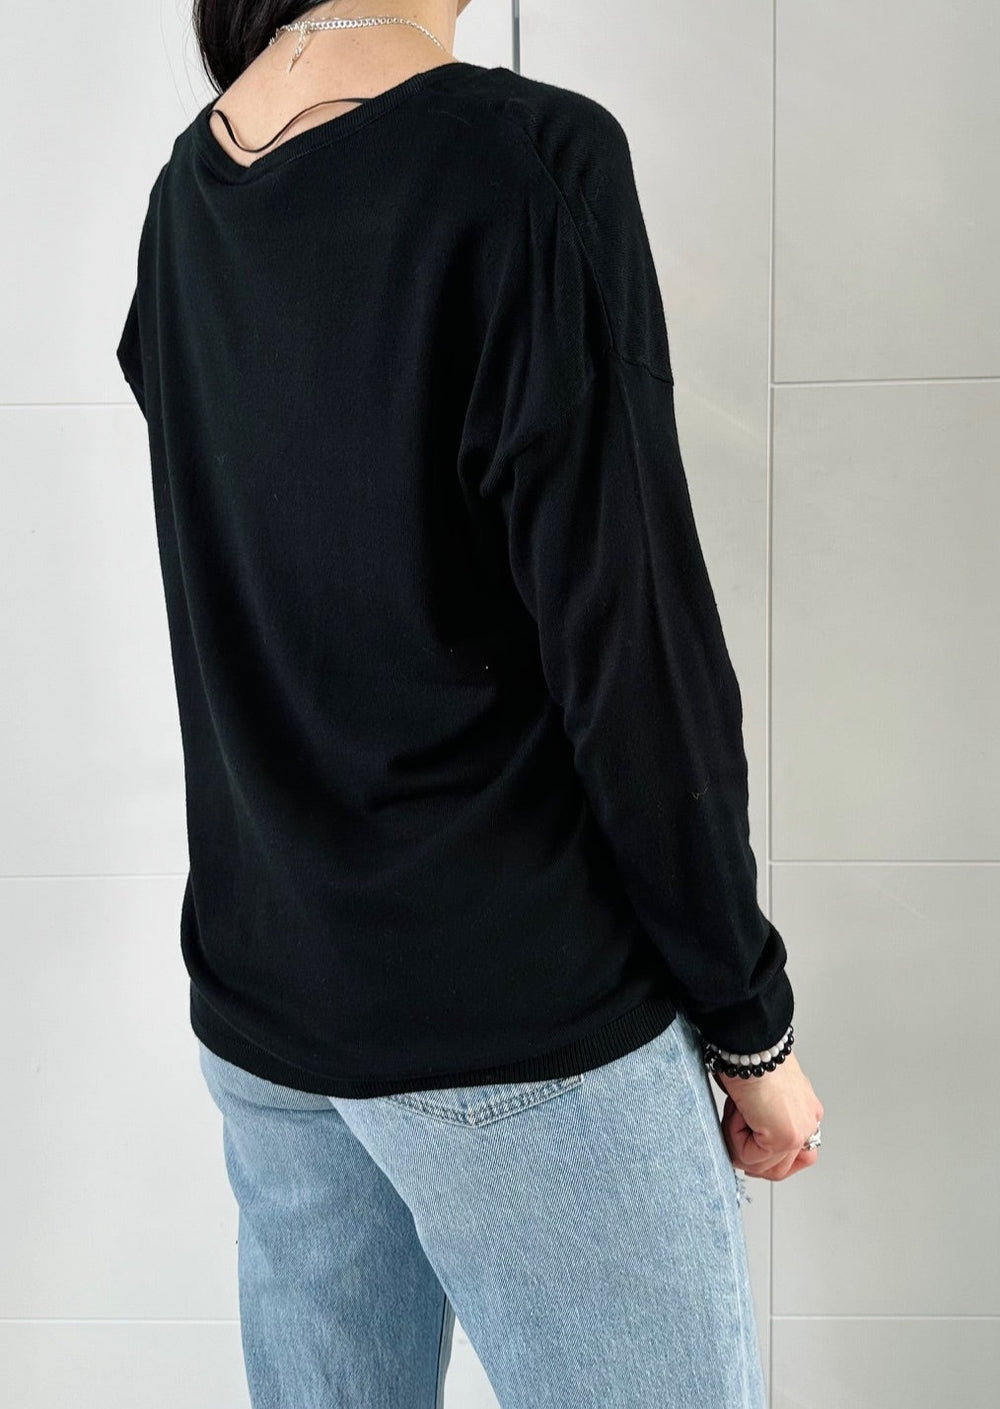 Back To Basics Knitted Black Sweater